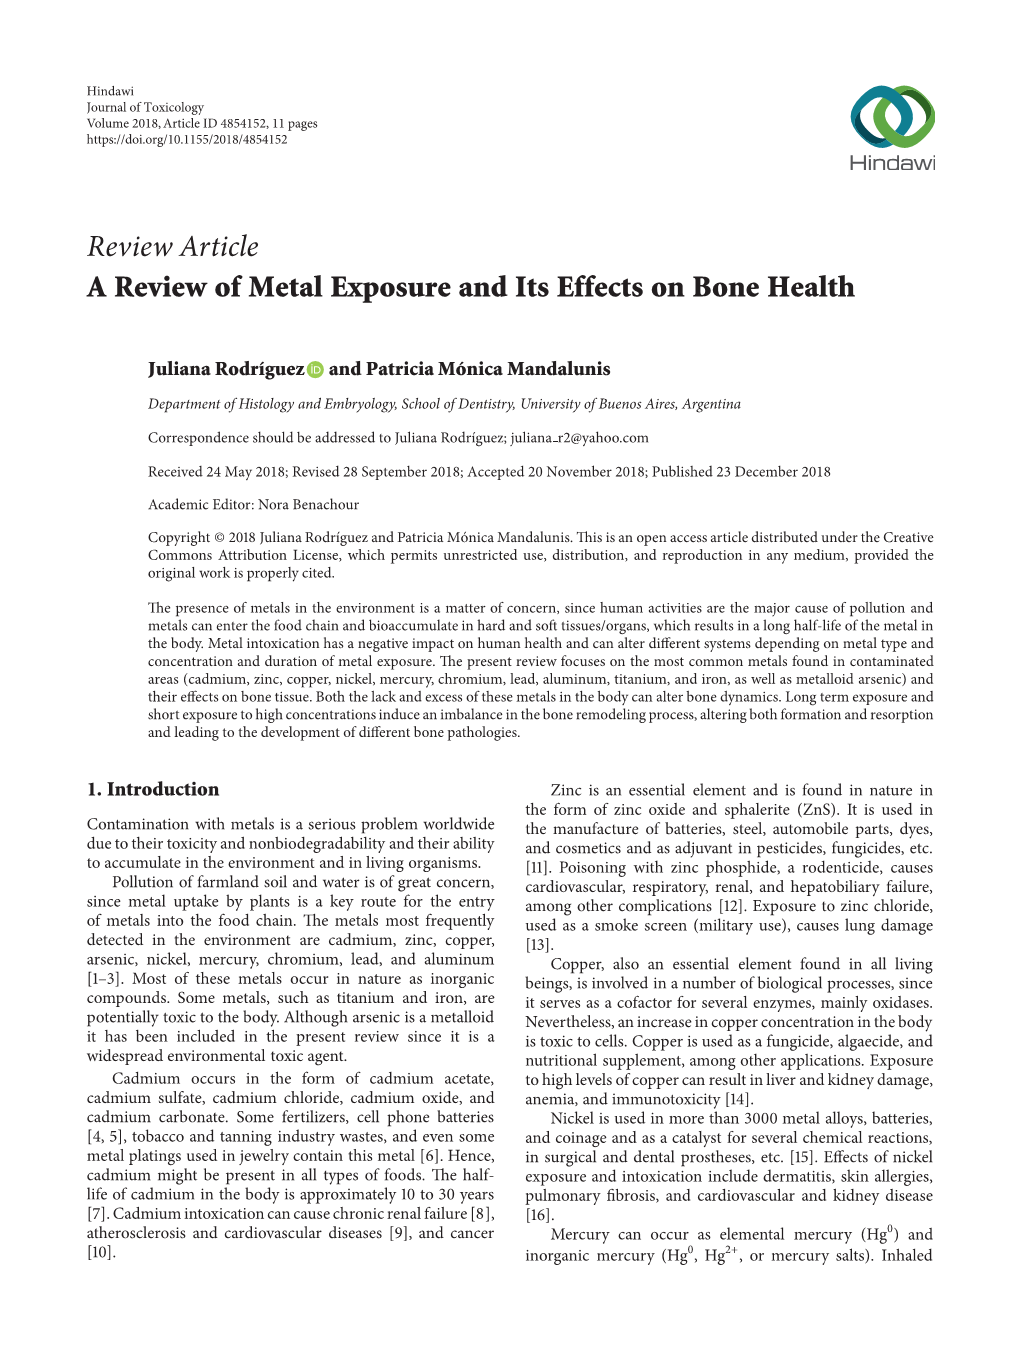 Review Article a Review of Metal Exposure and Its Effects on Bone Health